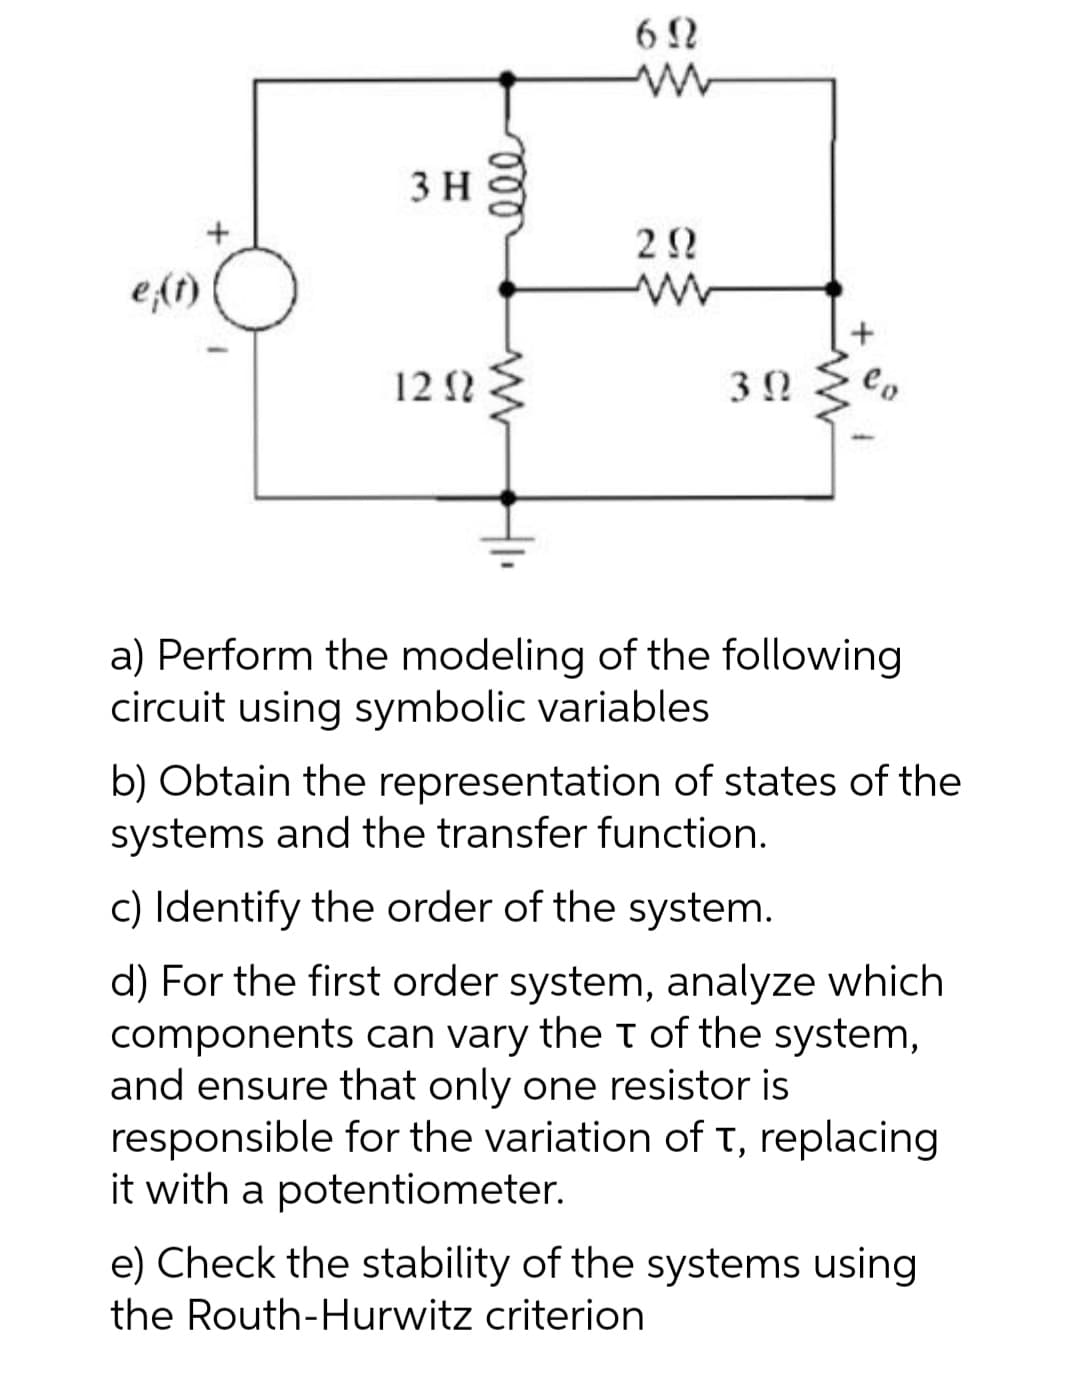 6 N
3 H
e(1)
12 1 :
Co
a) Perform the modeling of the following
circuit using symbolic variables
b) Obtain the representation of states of the
systems and the transfer function.
c) Identify the order of the system.
d) For the first order system, analyze which
components can vary the t of the system,
and ensure that only one resistor is
responsible for the variation of t, replacing
it with a potentiometer.
e) Check the stability of the systems using
the Routh-Hurwitz criterion
